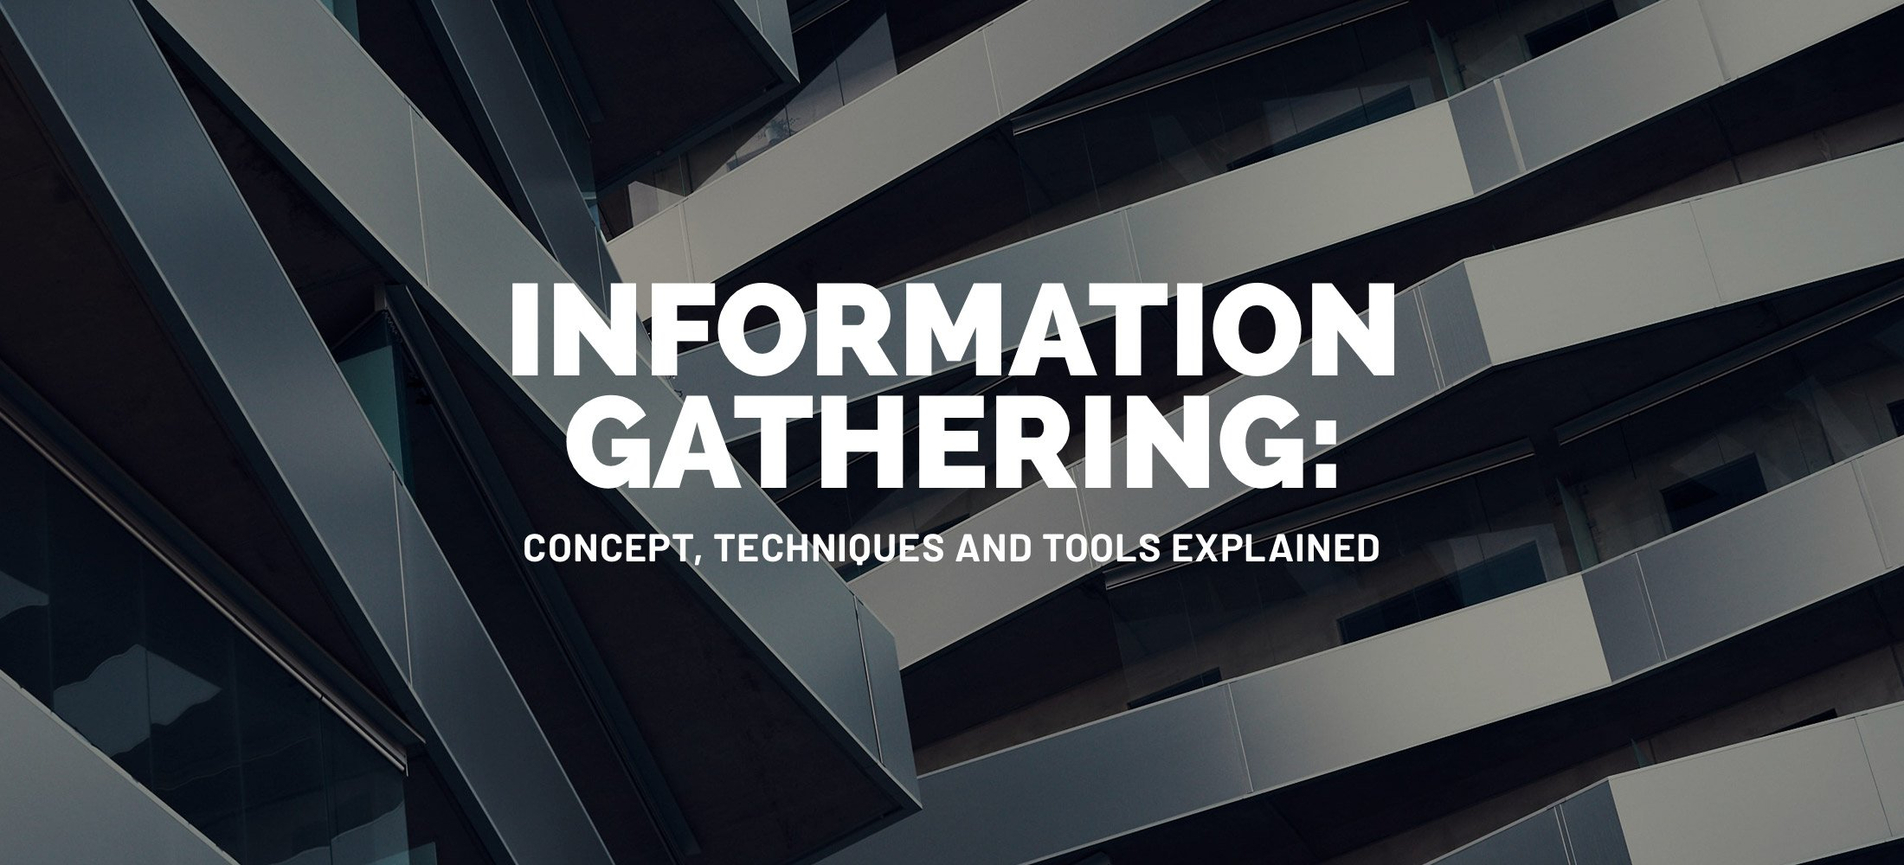 Information Gathering: Concept, Techniques and Tools explained.